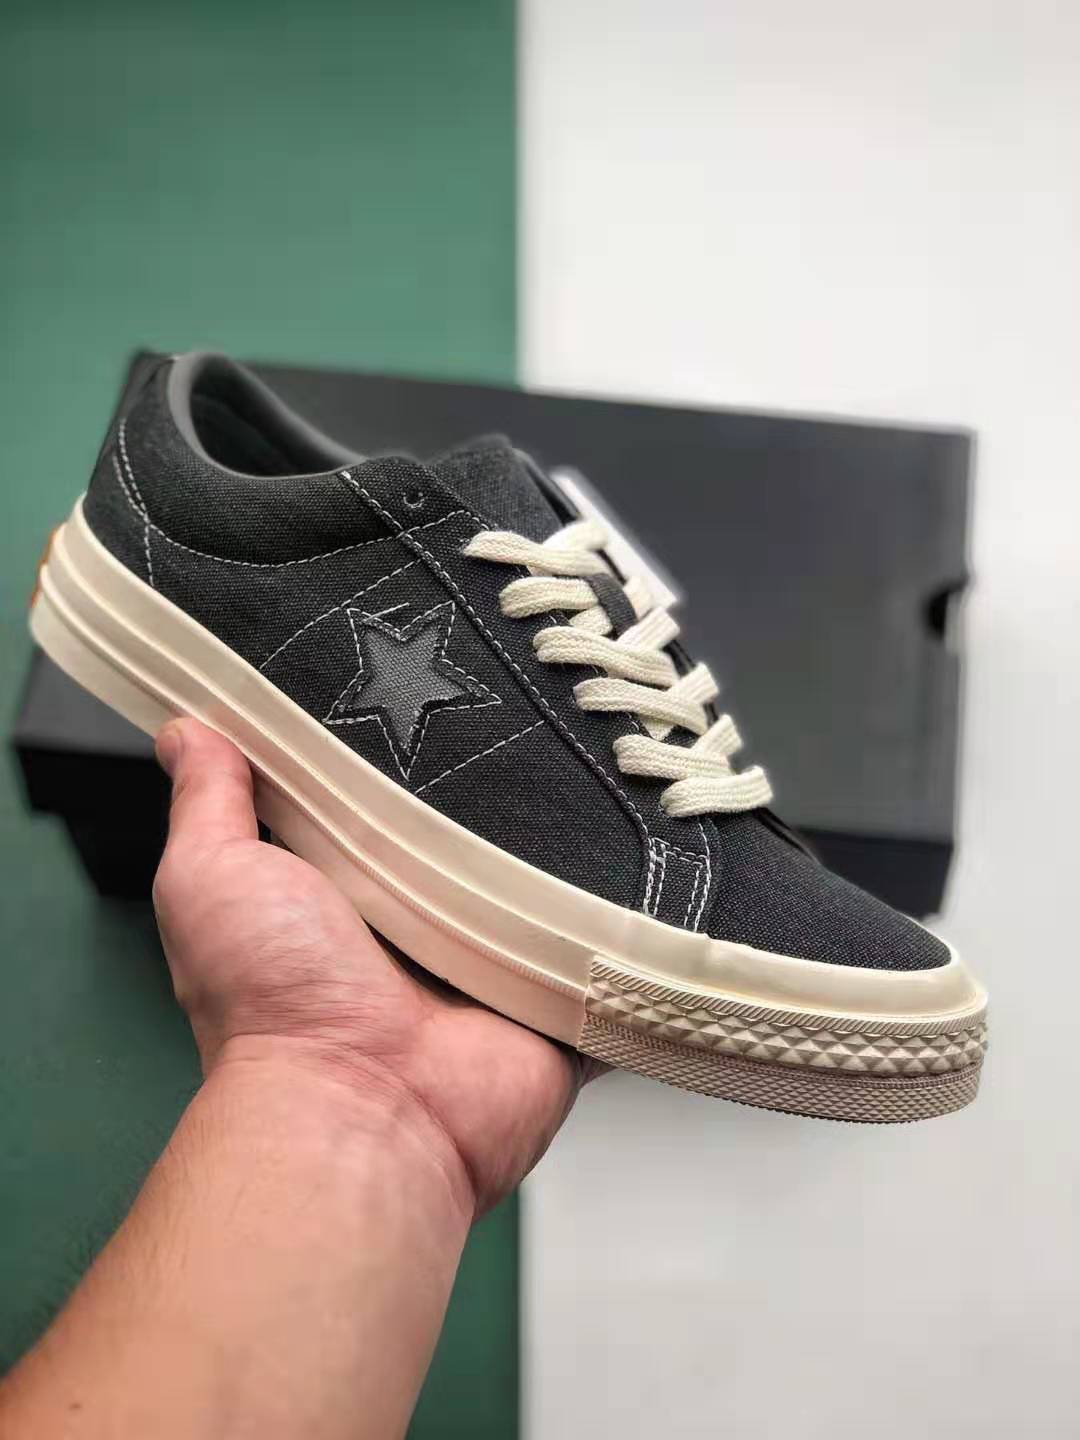 Converse One Star Low 'Mason' 164360C - Iconic Style & Unmatched Comfort